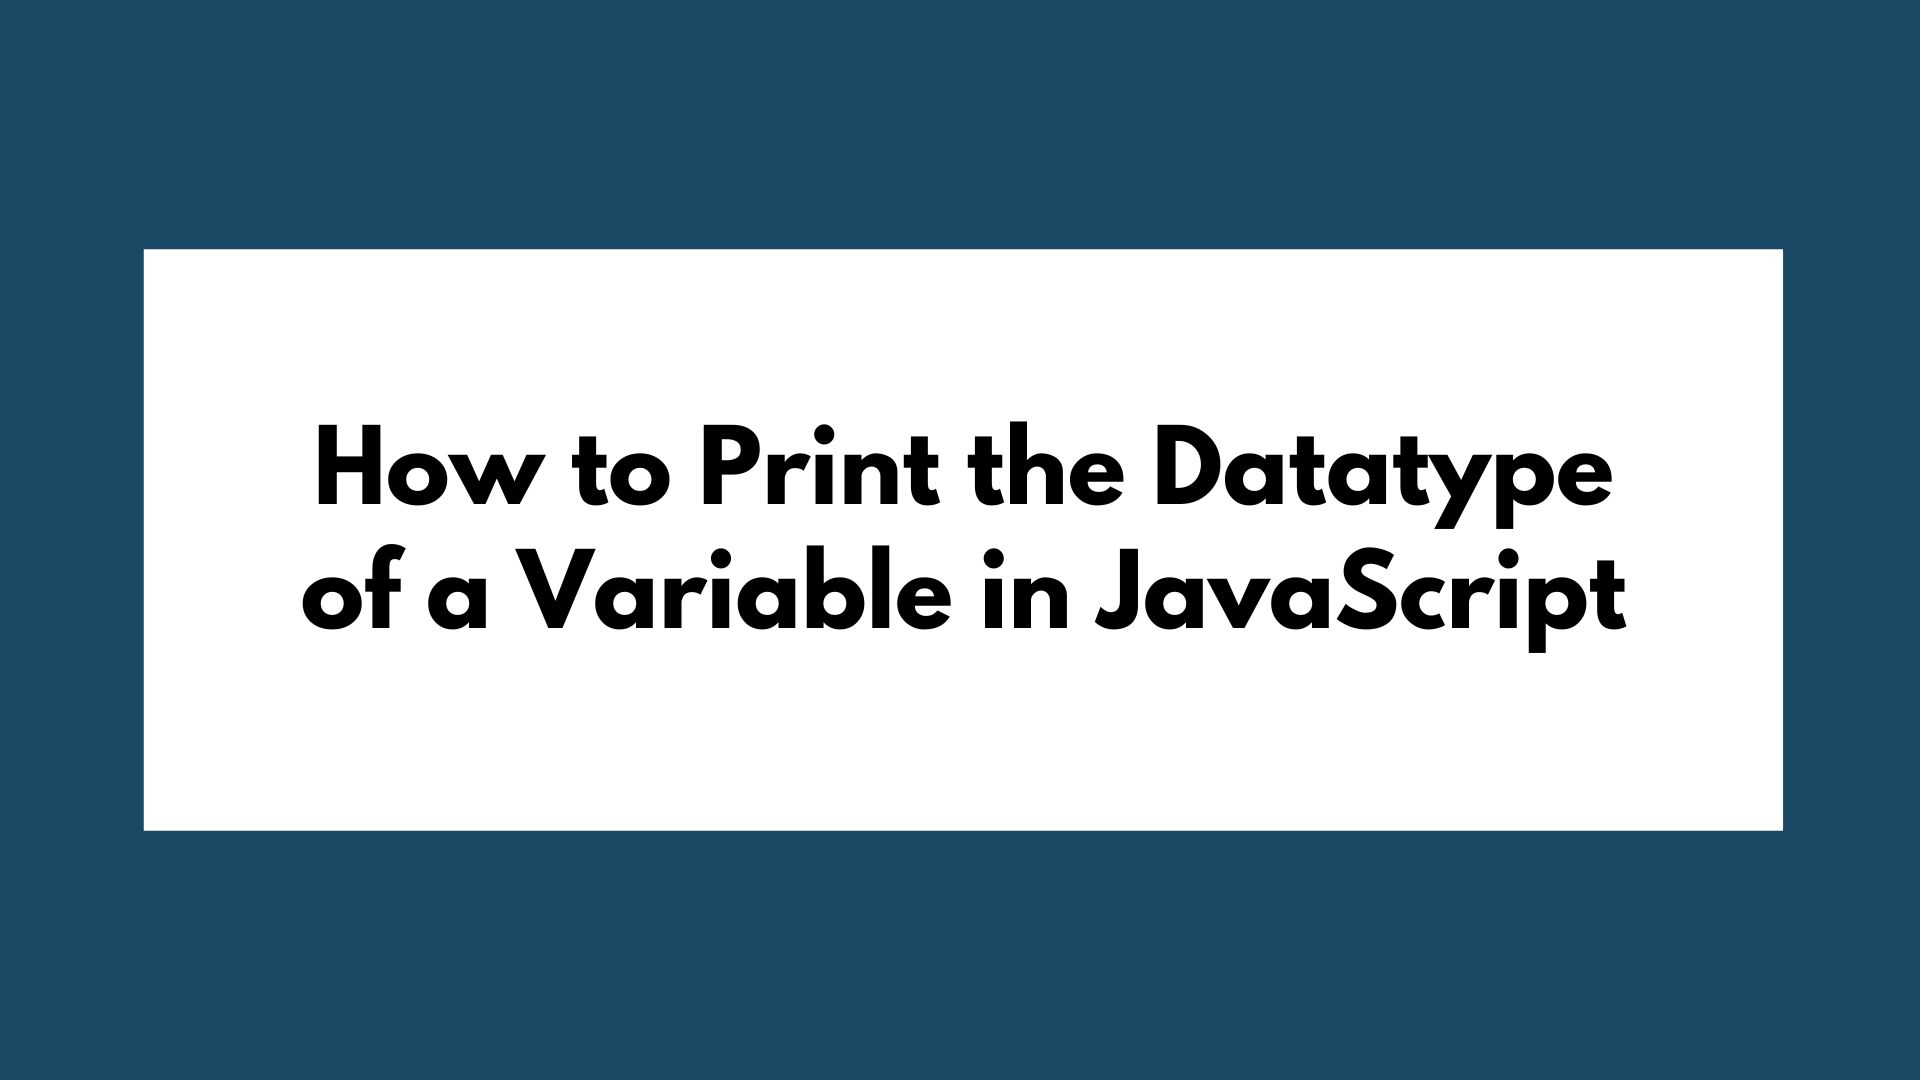 How to Print the Datatype of a Variable in JavaScript